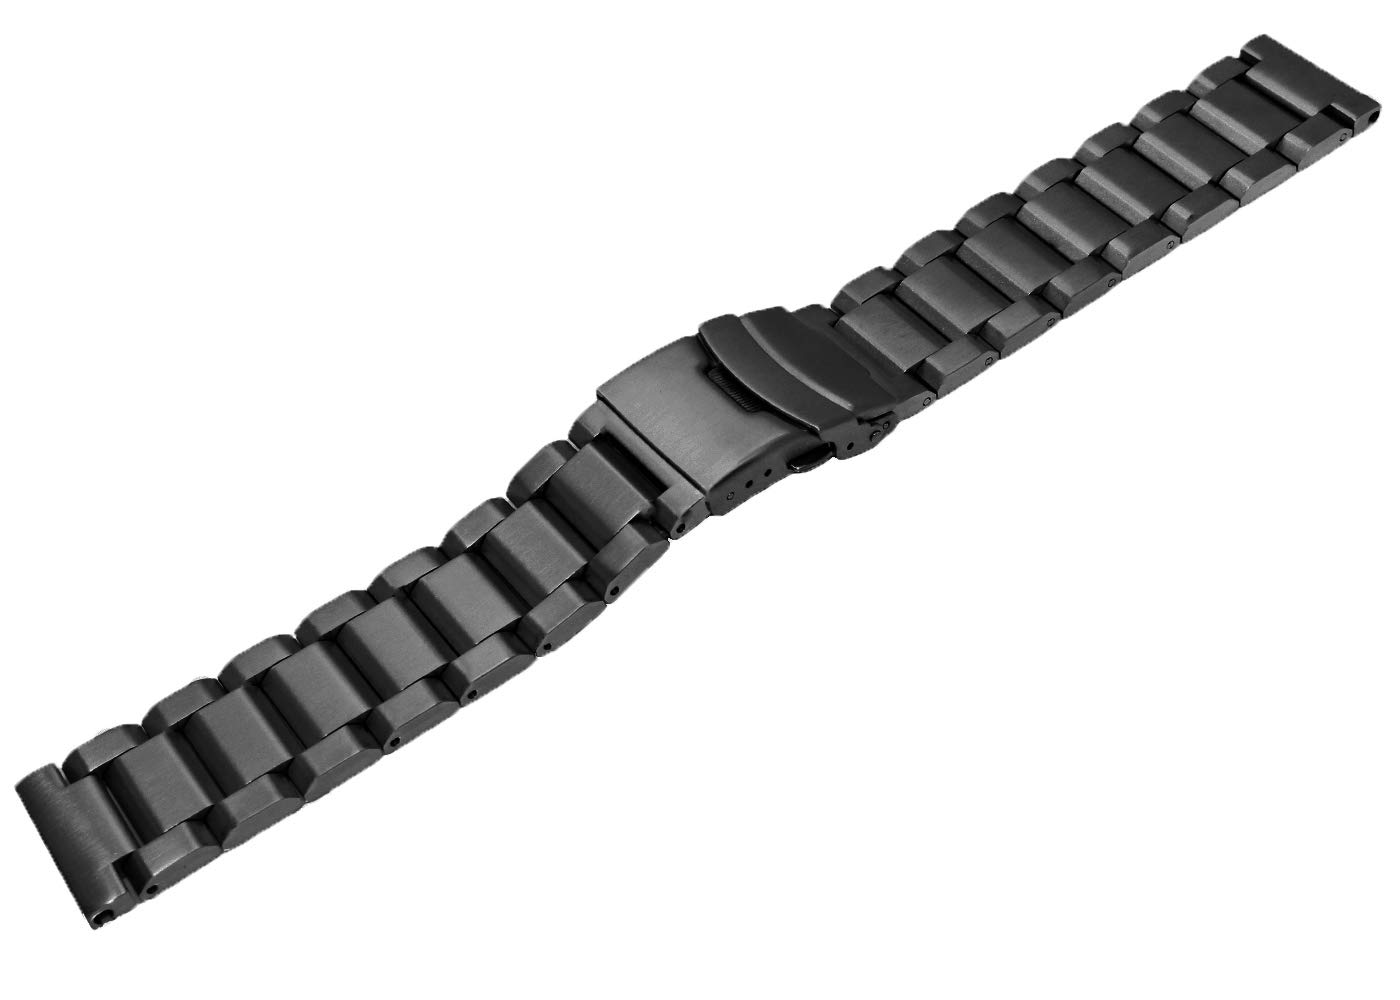 SINAIKE Brush Matte Finish Metal Watch Band Stainless Steel Bracelet Straps 18mm/20mm/22mm/24mm Double Buckle Black or Silver